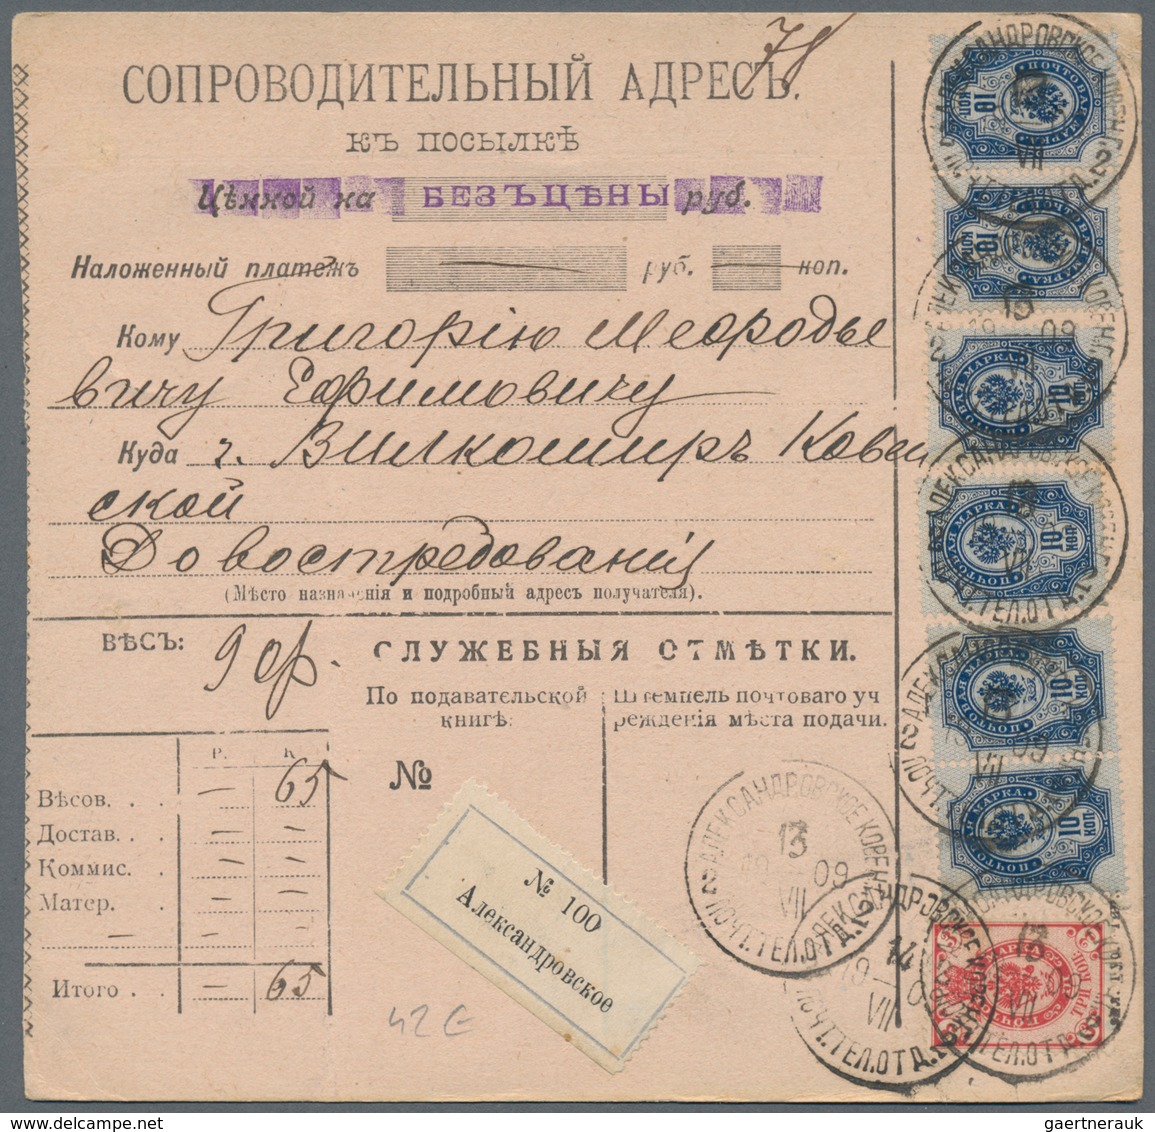 Russland: 1863/1924, holding of ca. 120 letters, some parcel cards, postcards (incl. by registered m